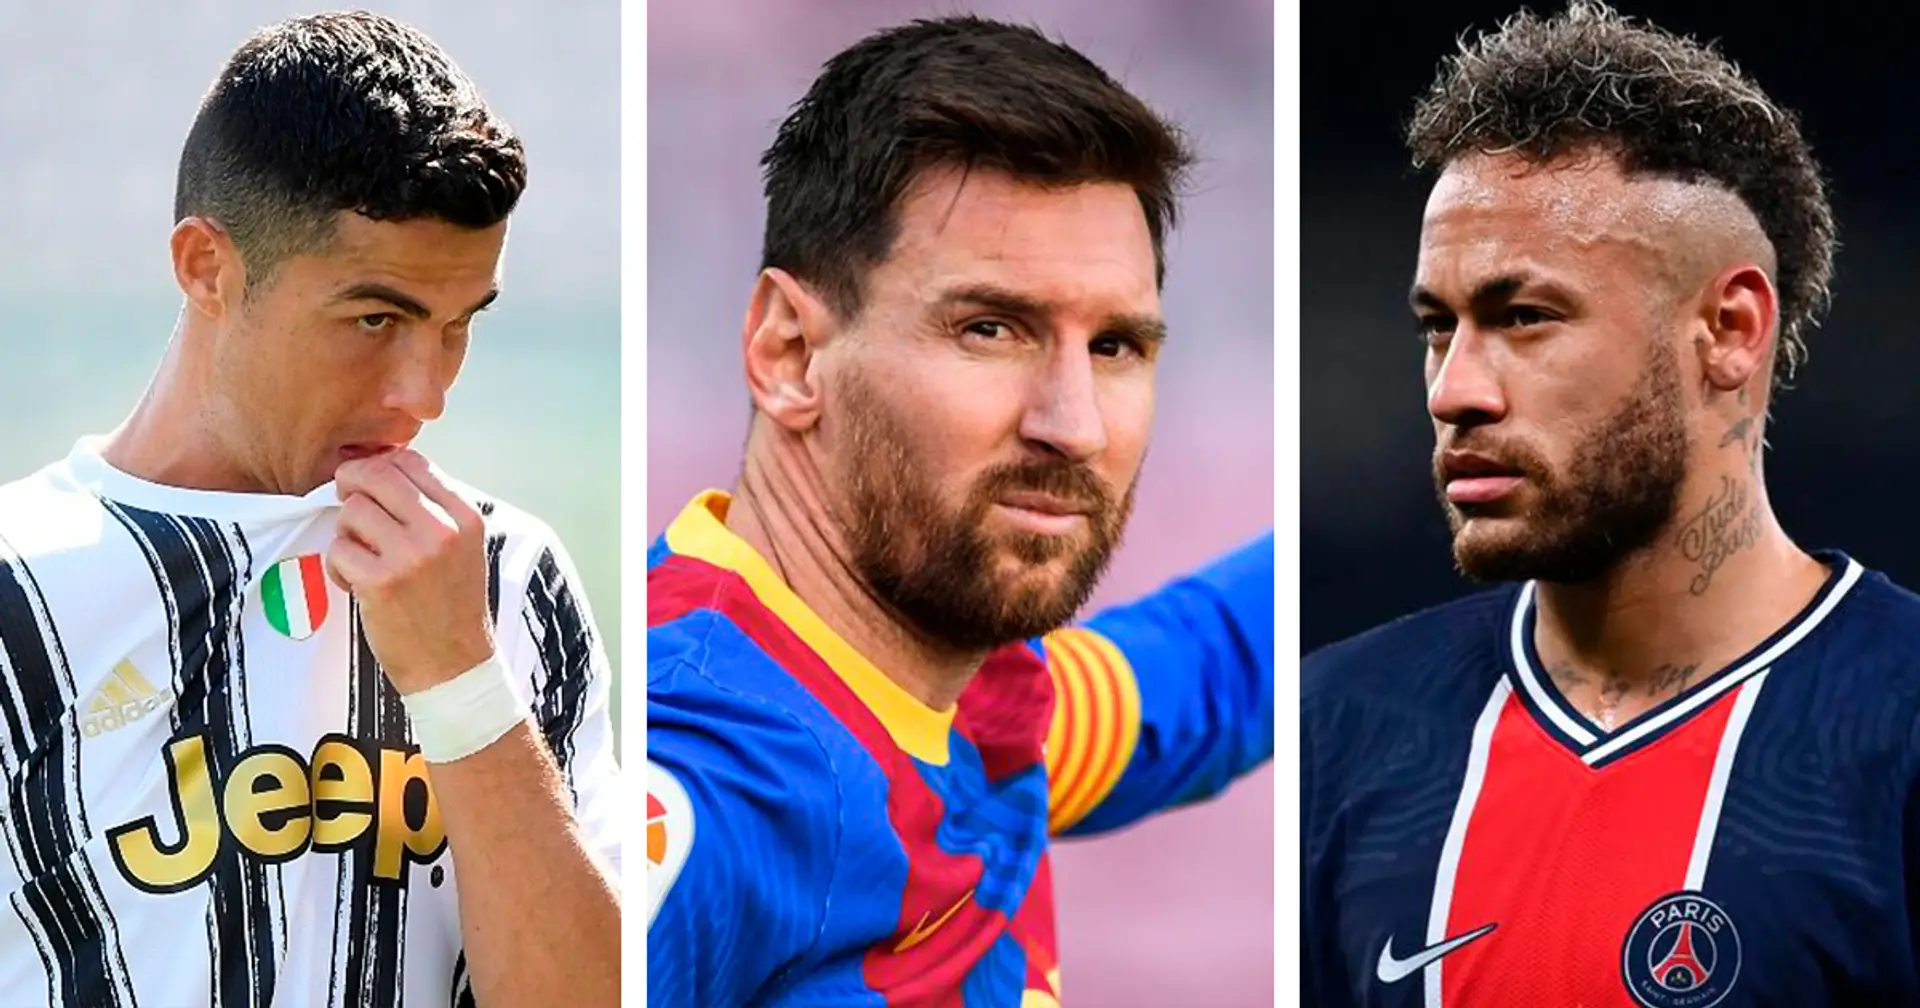 Messi 2nd-richest athlete in the world, Neymar out of top 5 – Forbes